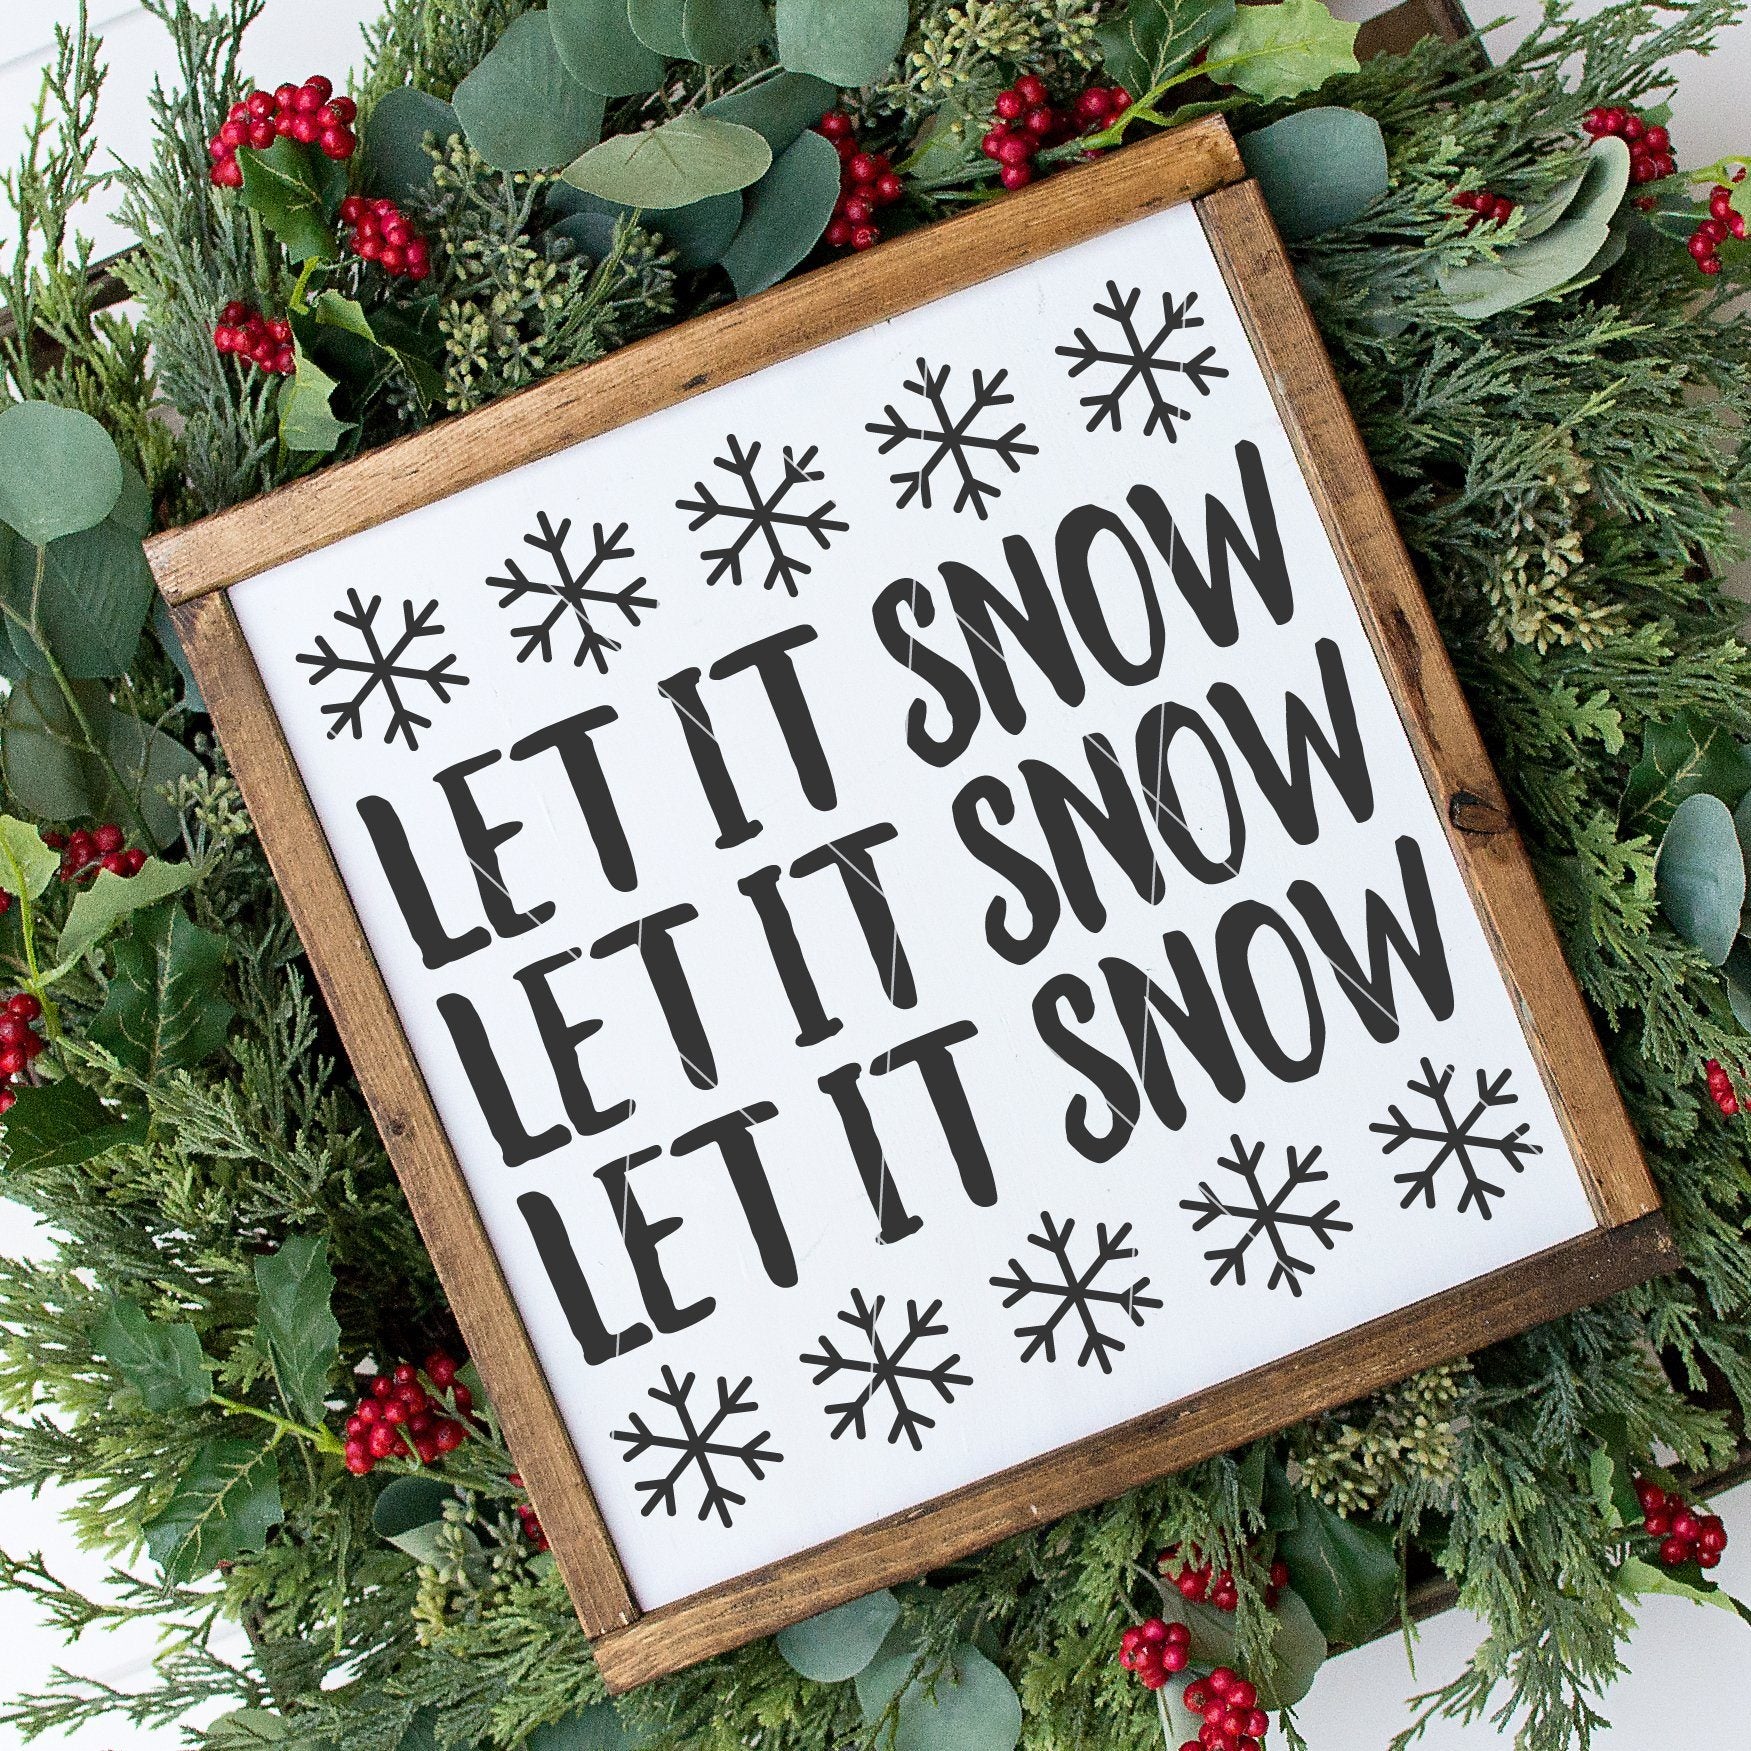 Let It Snow with Snowflakes SVG File - Commercial Use SVG Files for Cricut & Silhouette